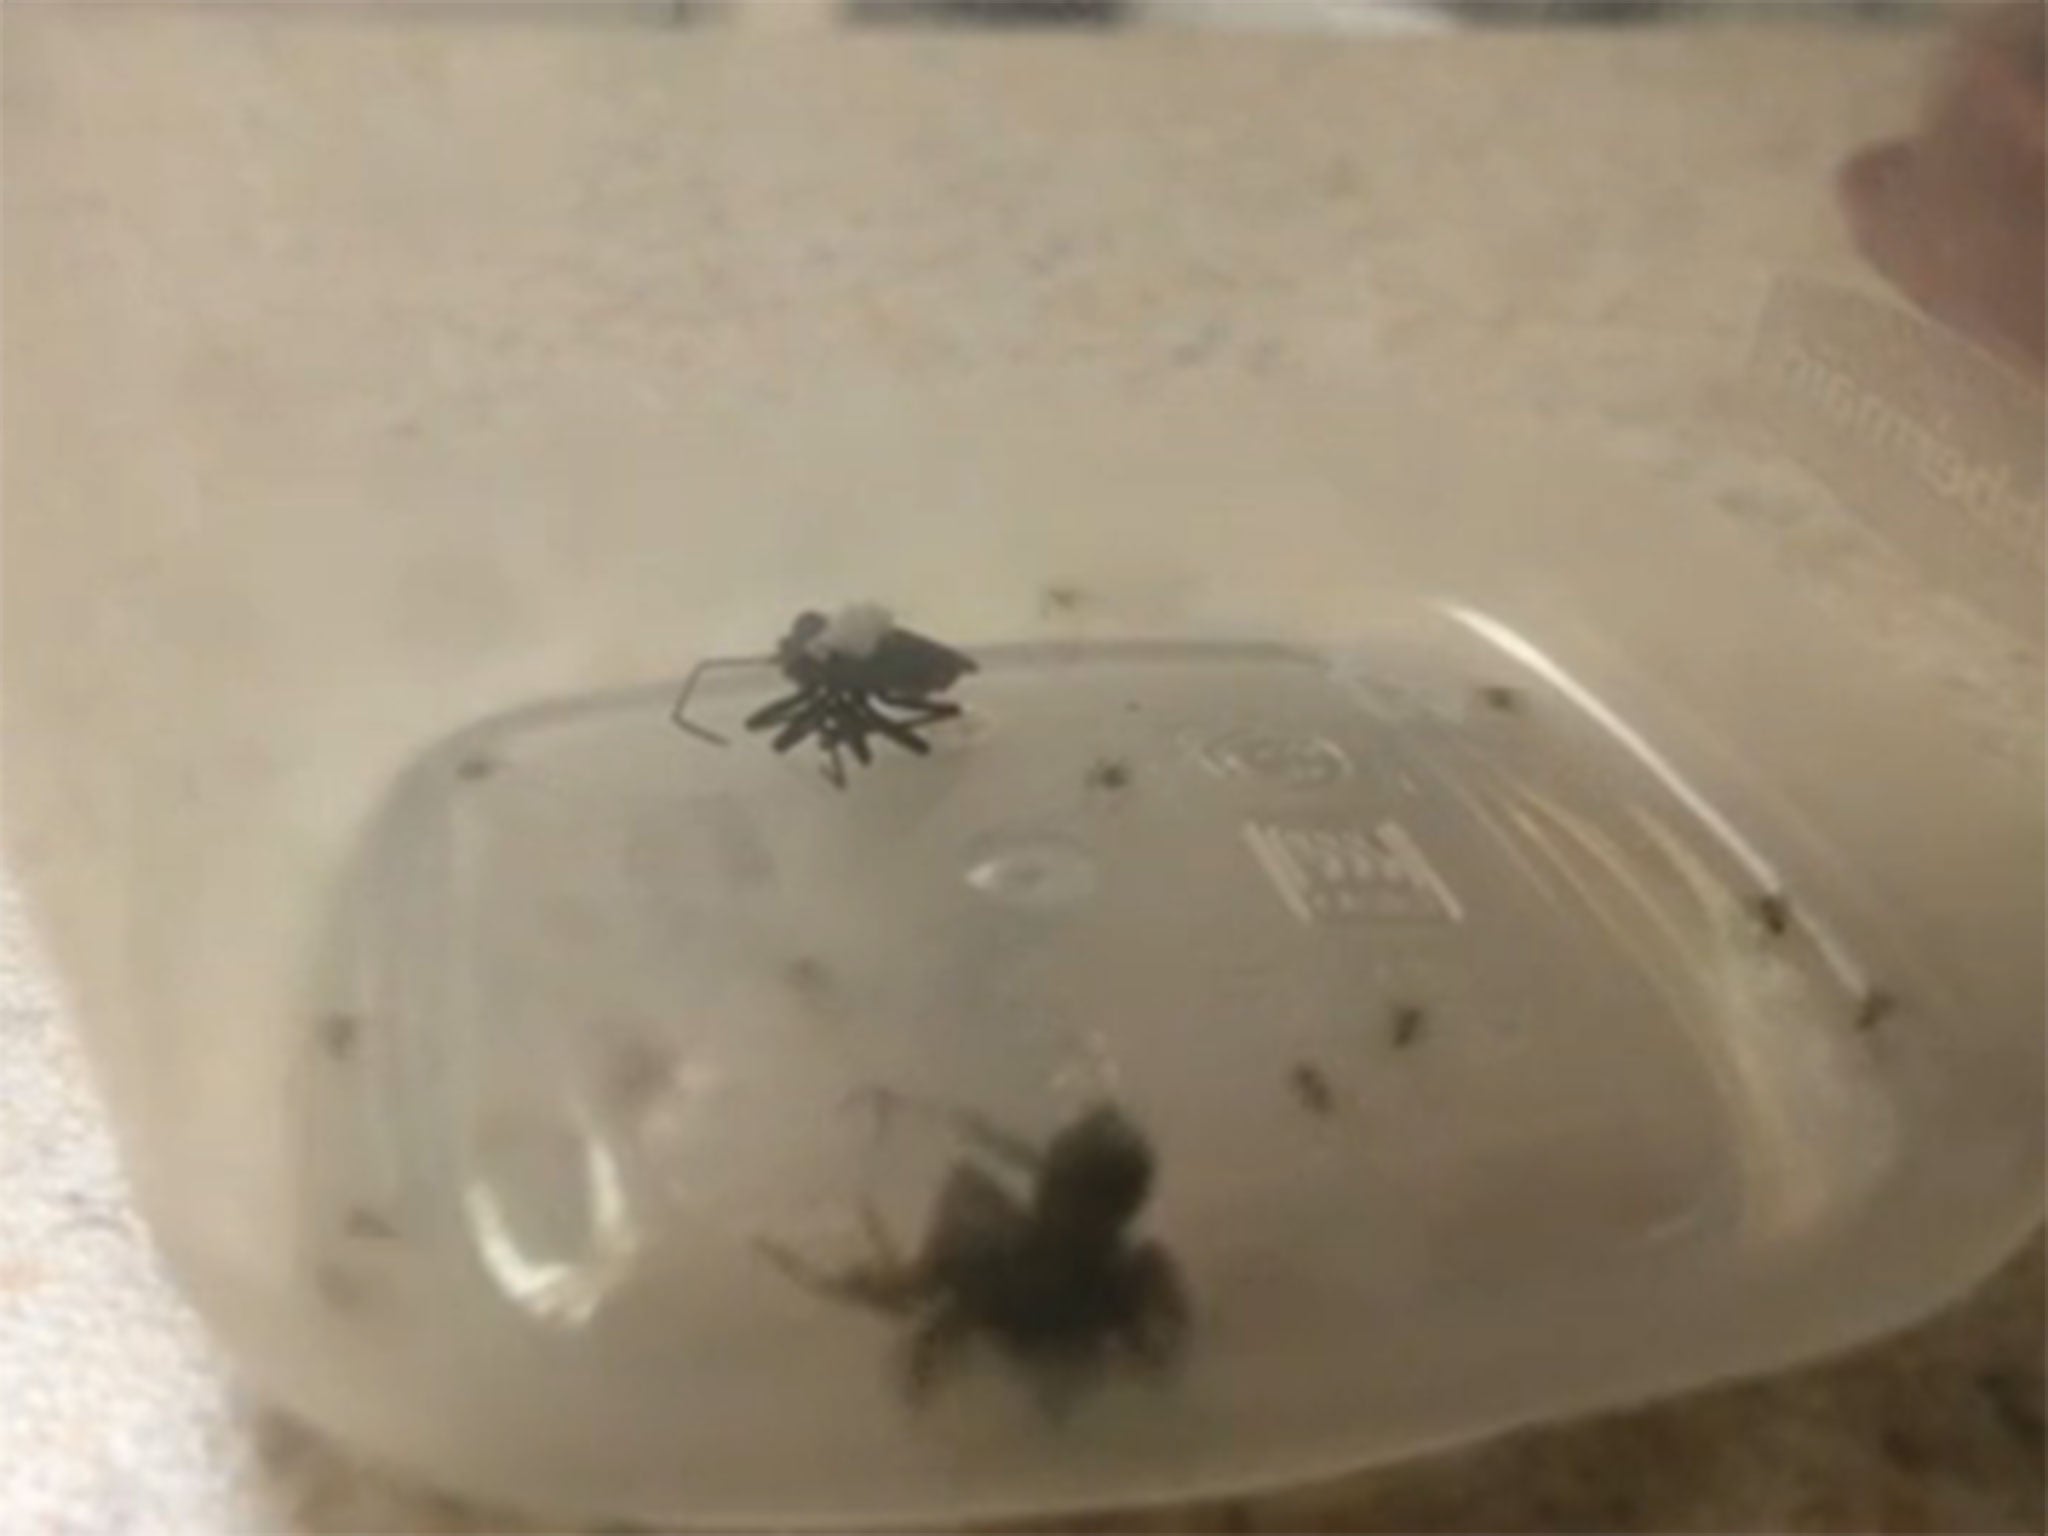 The spider unleashed 12 babies when it was attacked